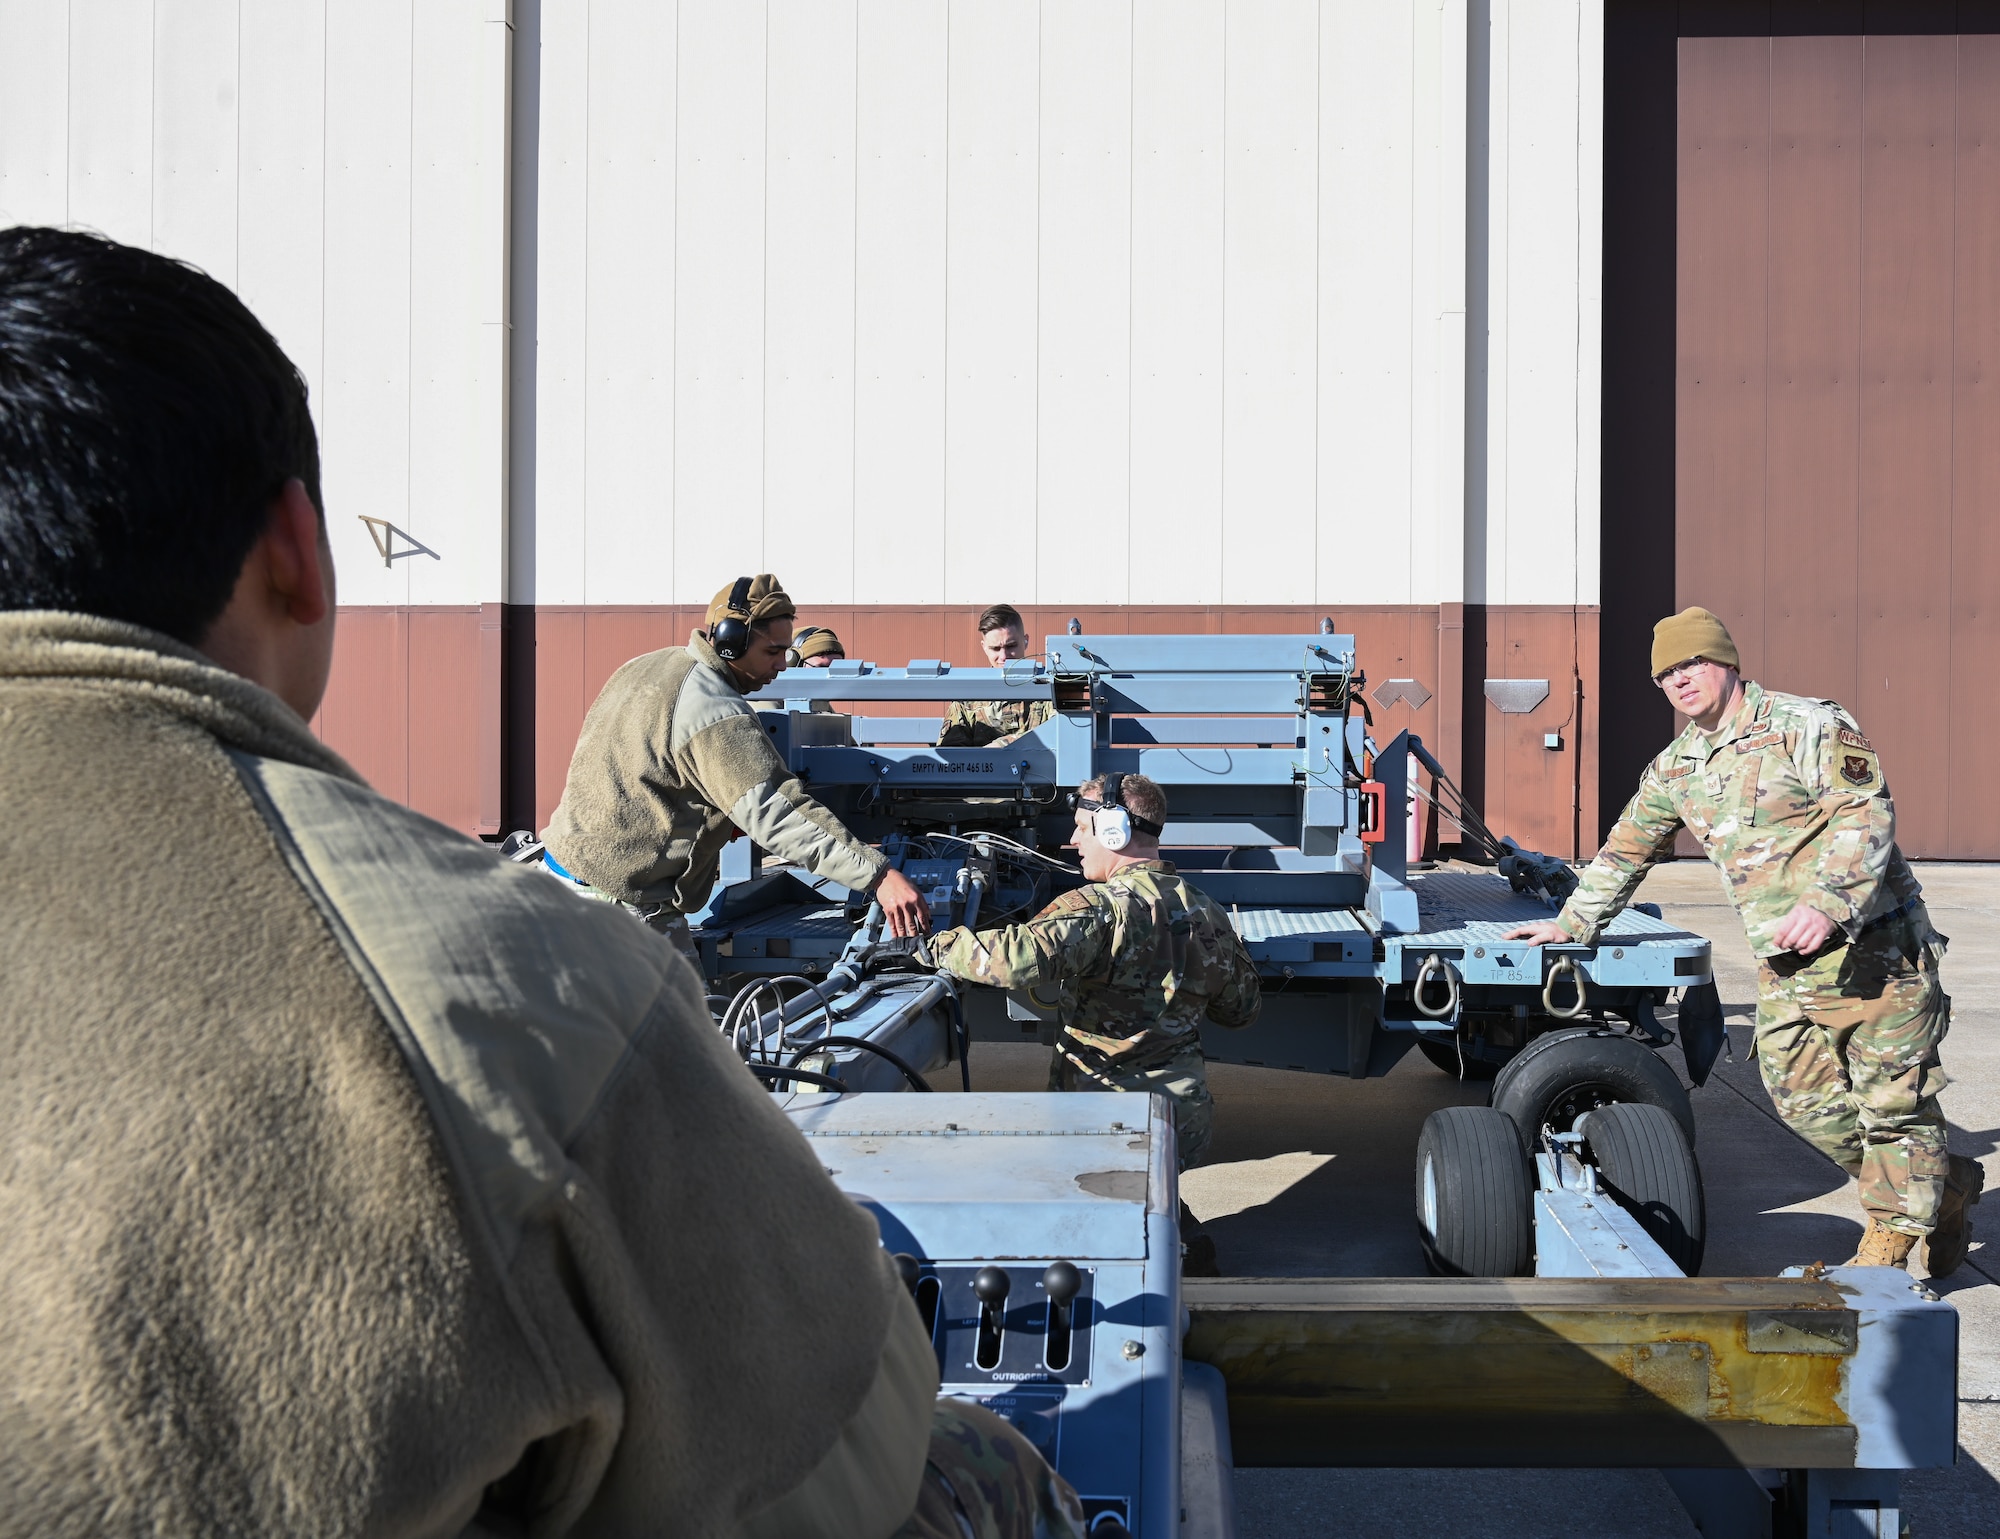 Airmen assigned to the 509th Aircraft Maintenance Squadron perform training on the launcher load system at Whiteman Air Force Base, Missouri, Feb. 2, 2023. The airmen connect the launcher load system adaptor to the jammer in preparation to download the rotary launcher assembly. (U.S. Air Force photo by Airman 1st Class Hailey Farrell)